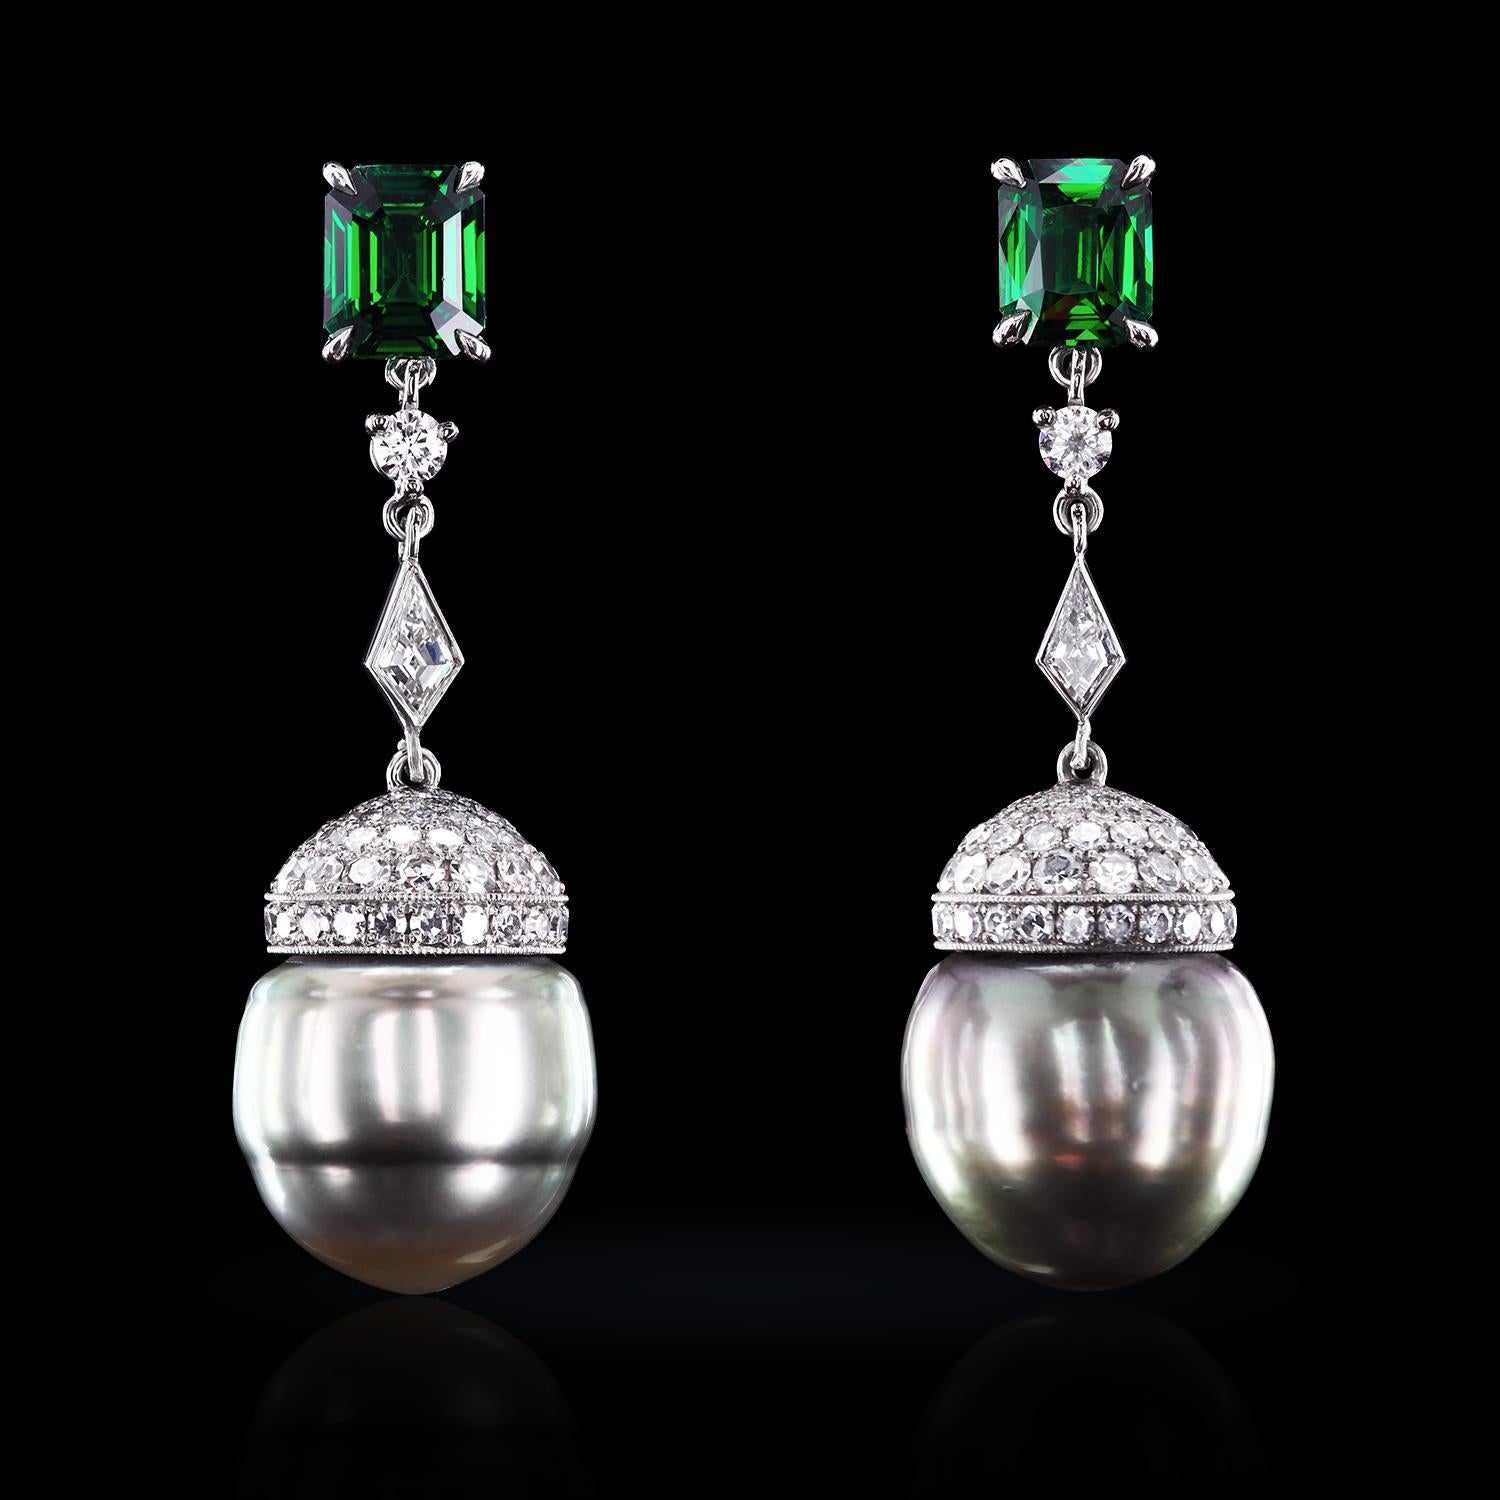 Contemporary Leon Mege Bespoke Platinum Drop Earrings with Tsavorite Garnets and Grey Pearls For Sale